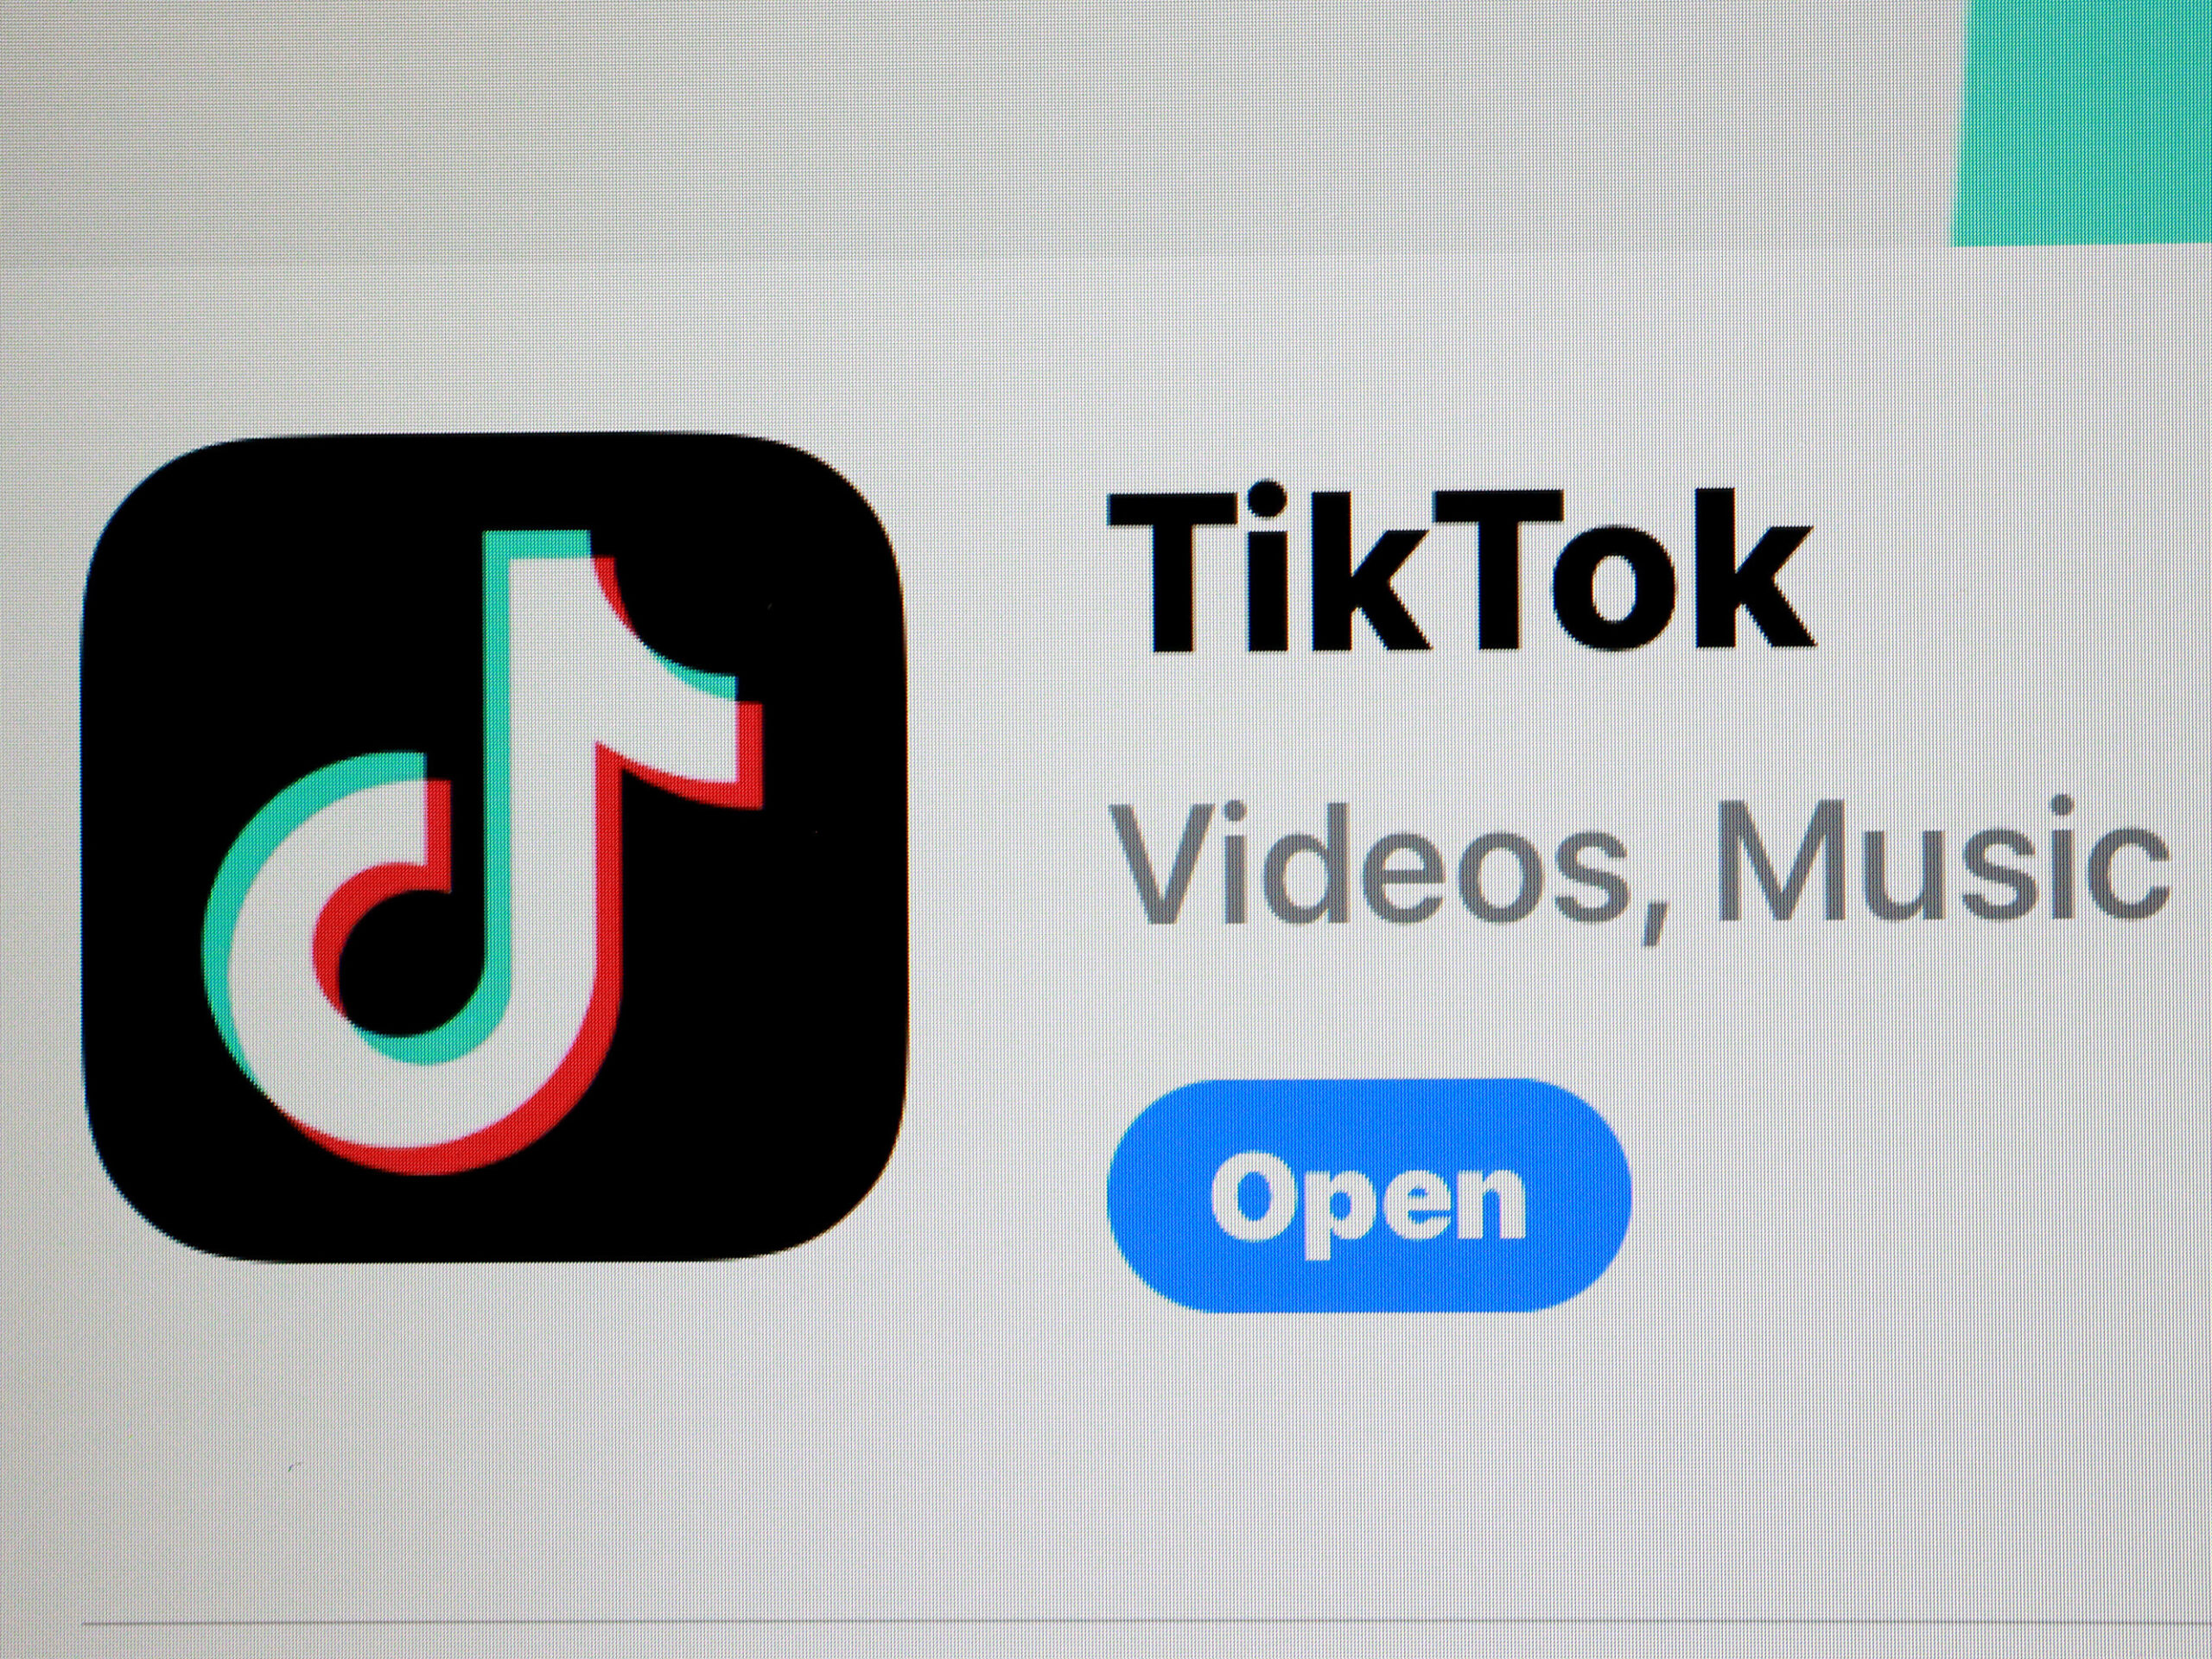 China’s influence operations against the U.S. are bigger than TikTok